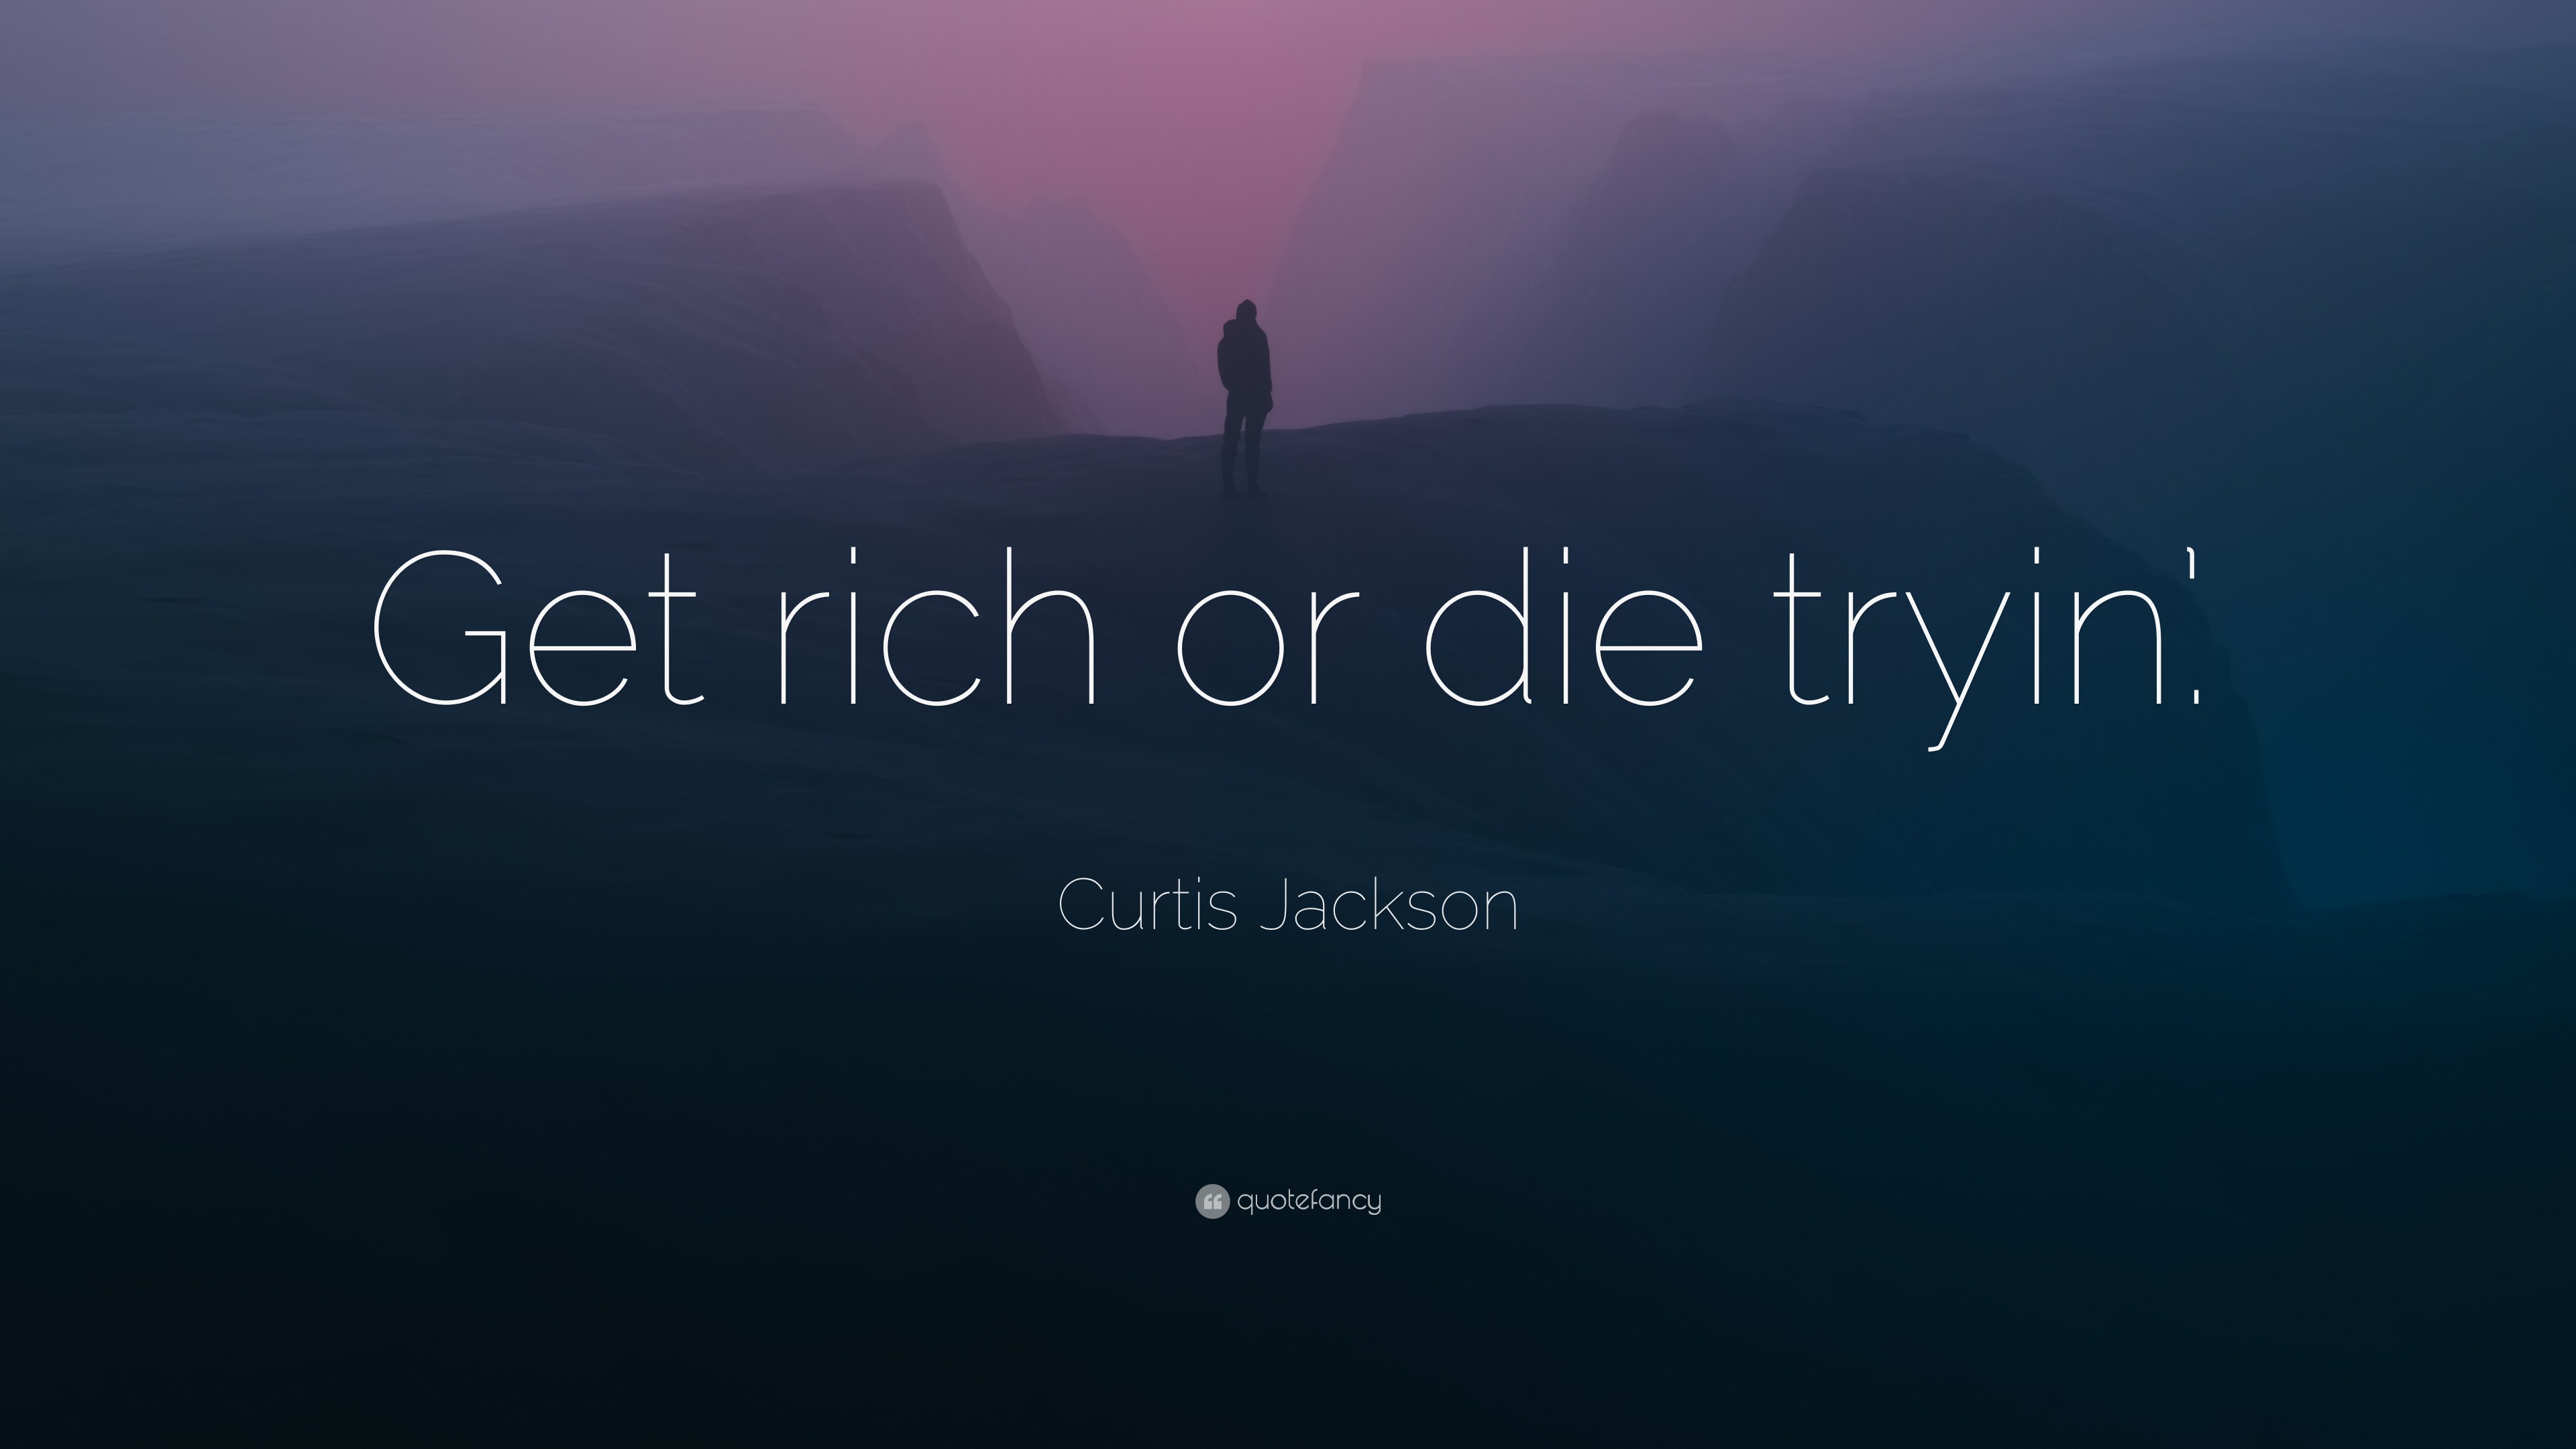 Curtis Jackson Quote Get rich or die tryin